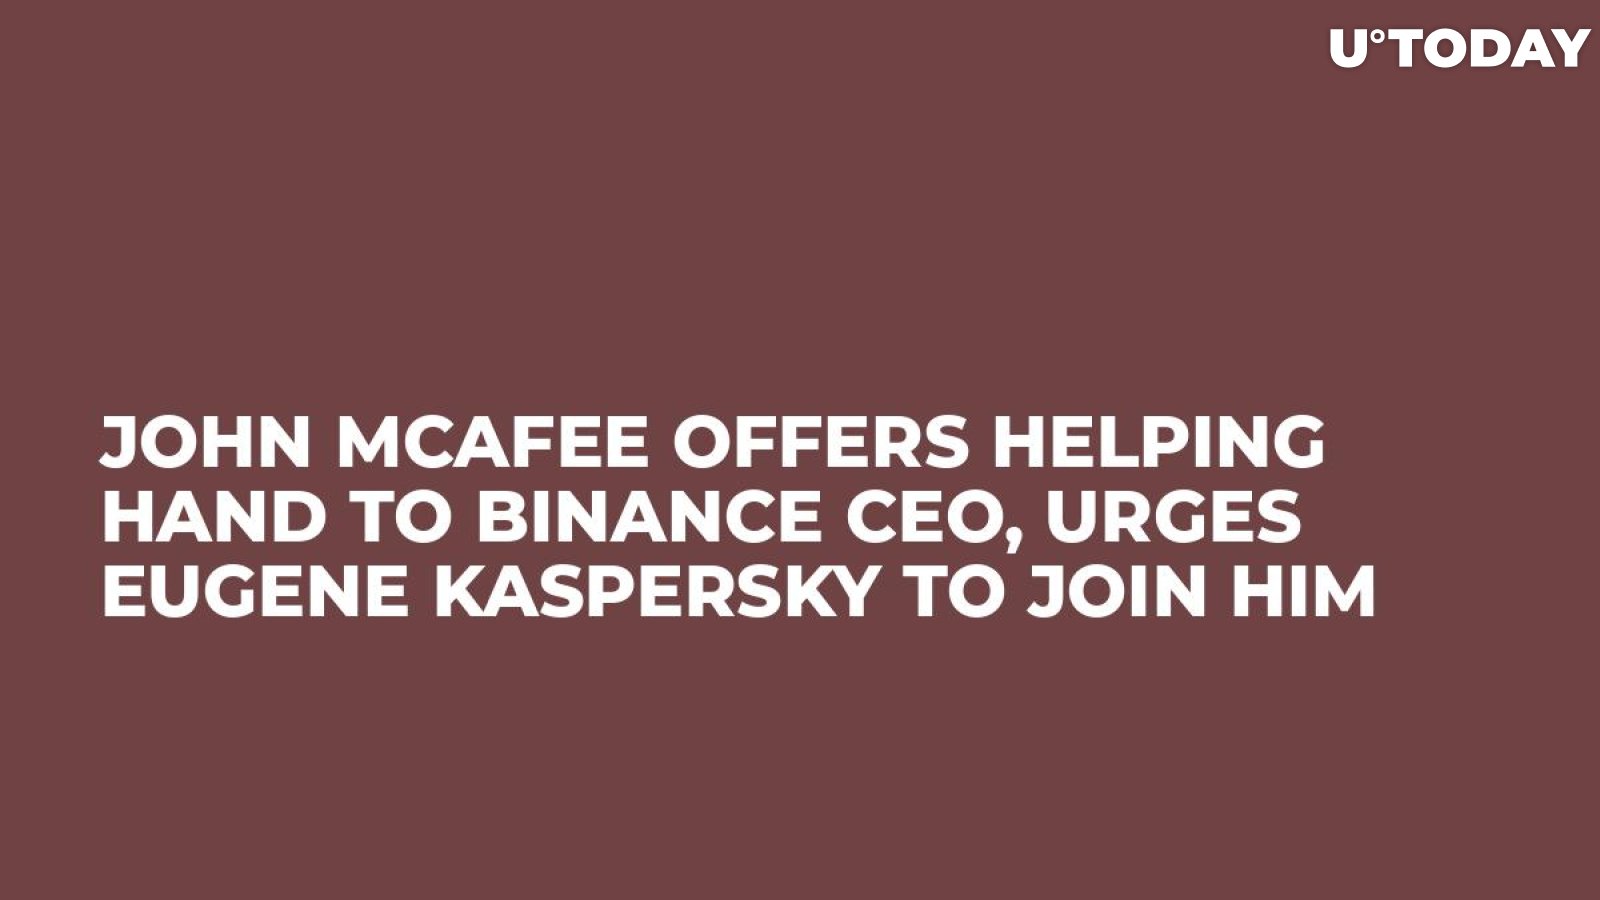 John McAfee Offers Helping Hand to Binance CEO, Urges Eugene Kaspersky to Join Him